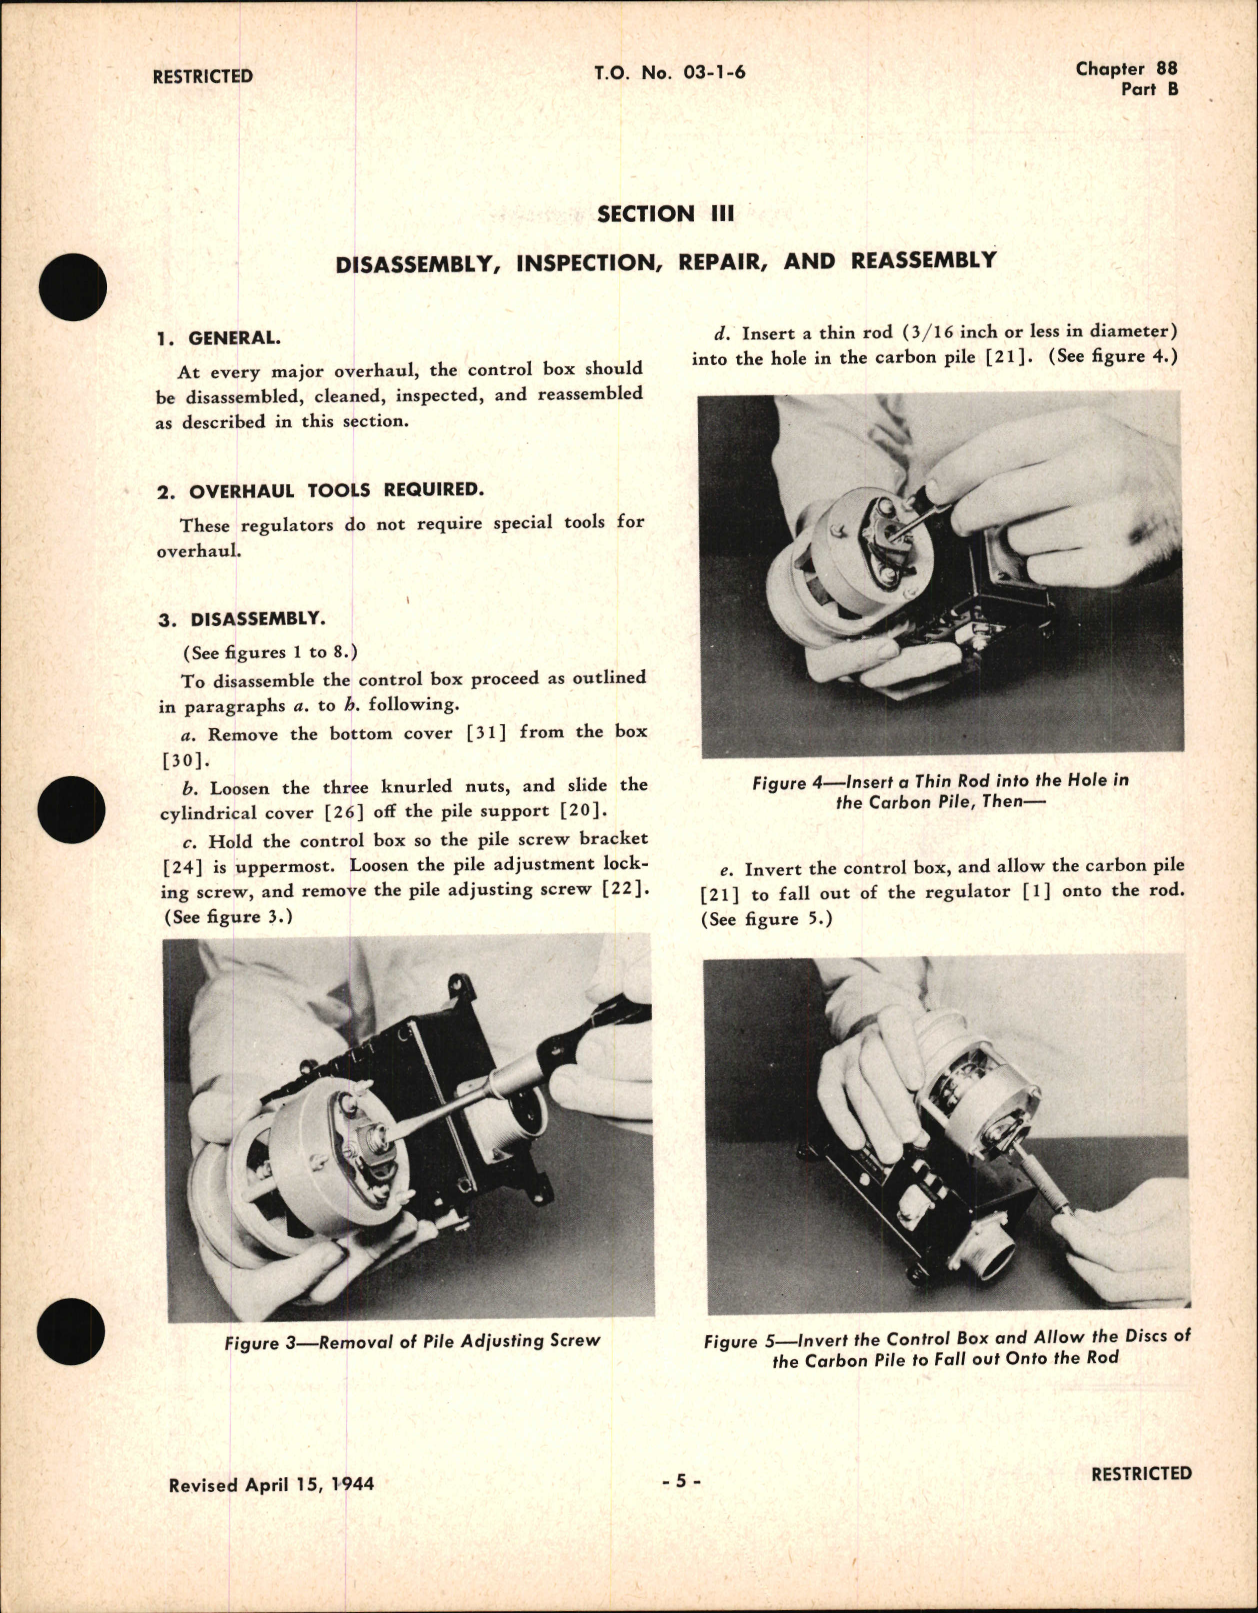 Sample page 5 from AirCorps Library document: Overhaul Instructions for D-C Carbon Pile Voltage Regulator Control Box, Type 1002 Model 1, Ch 88 Part B